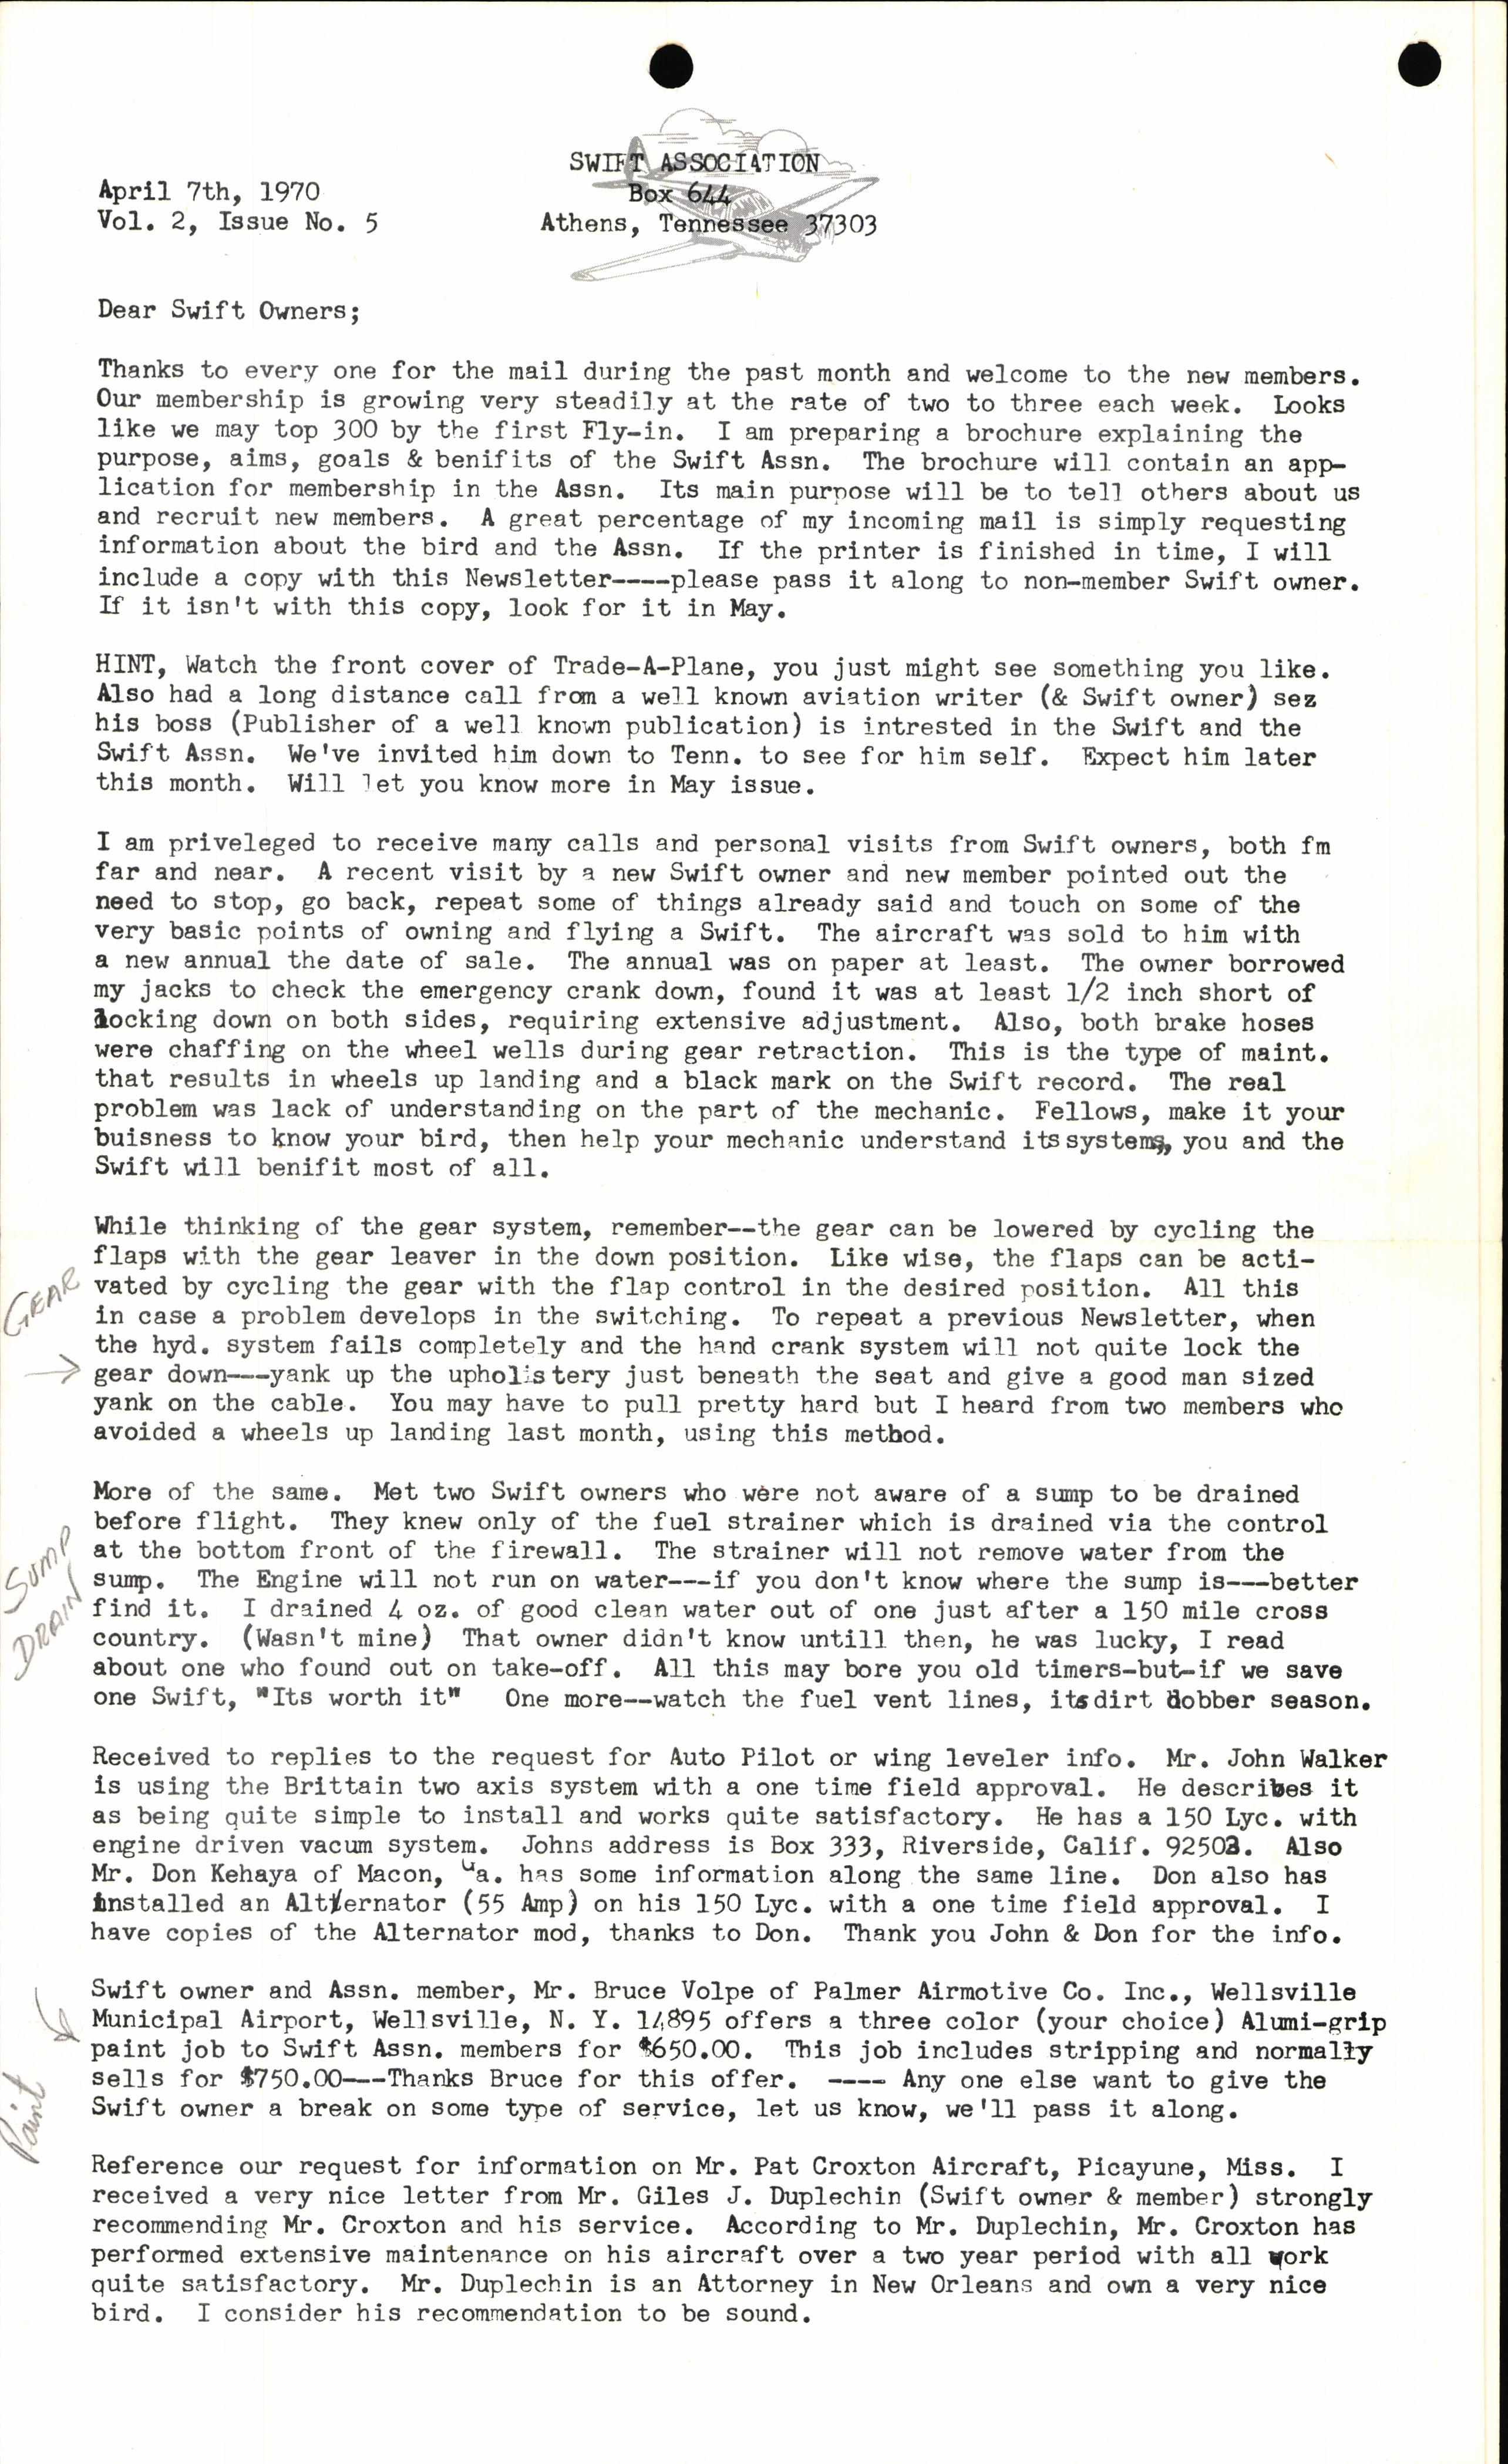 Sample page 1 from AirCorps Library document: April 1970